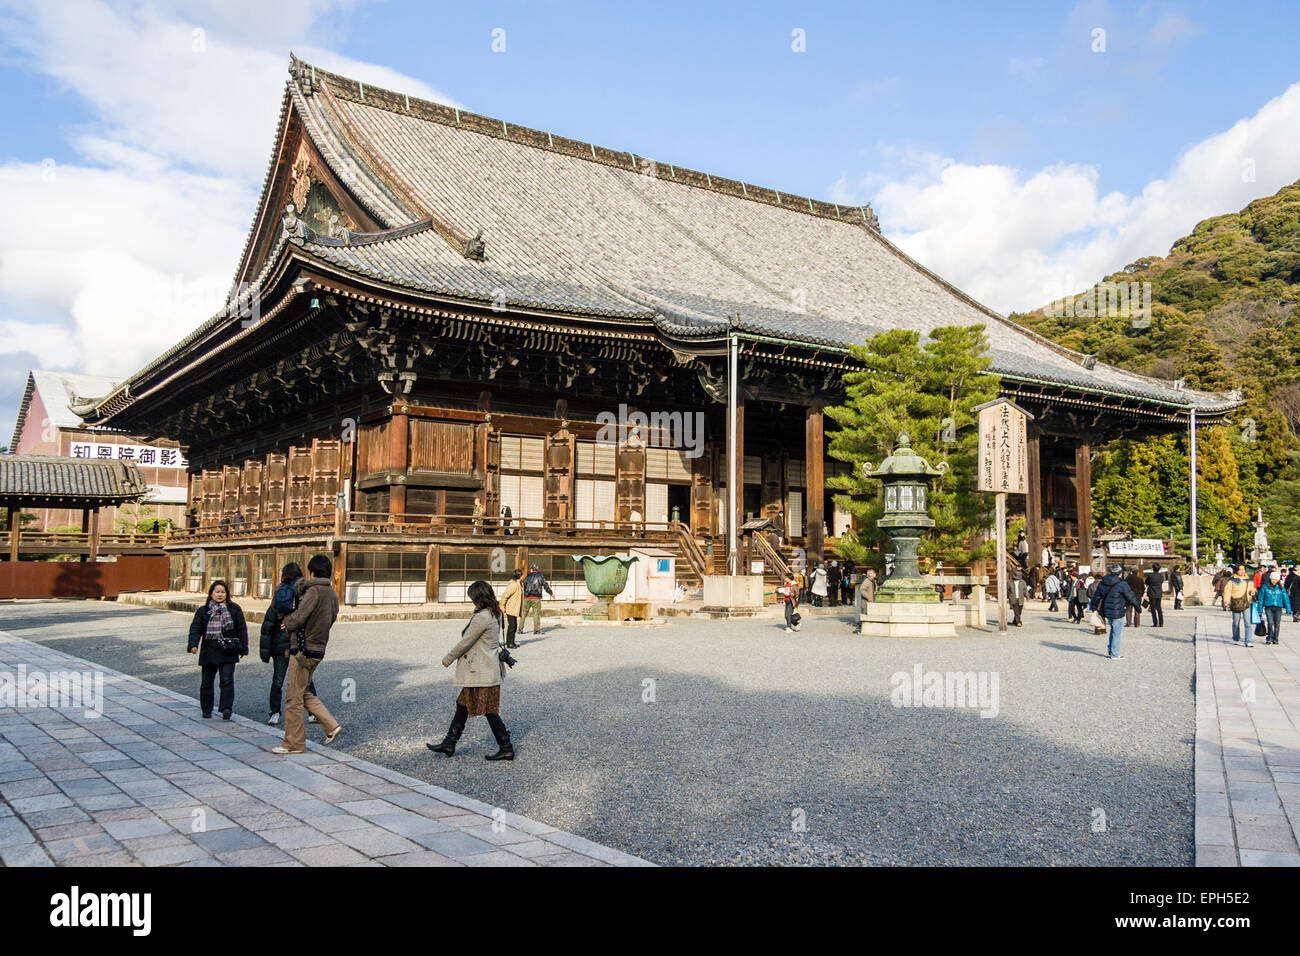 The large hall, Mie-do, of the Chion-in temple complex in Kyoto, Japan. Wintertime view of the wooden building with massive lantern outside. Stock Photo